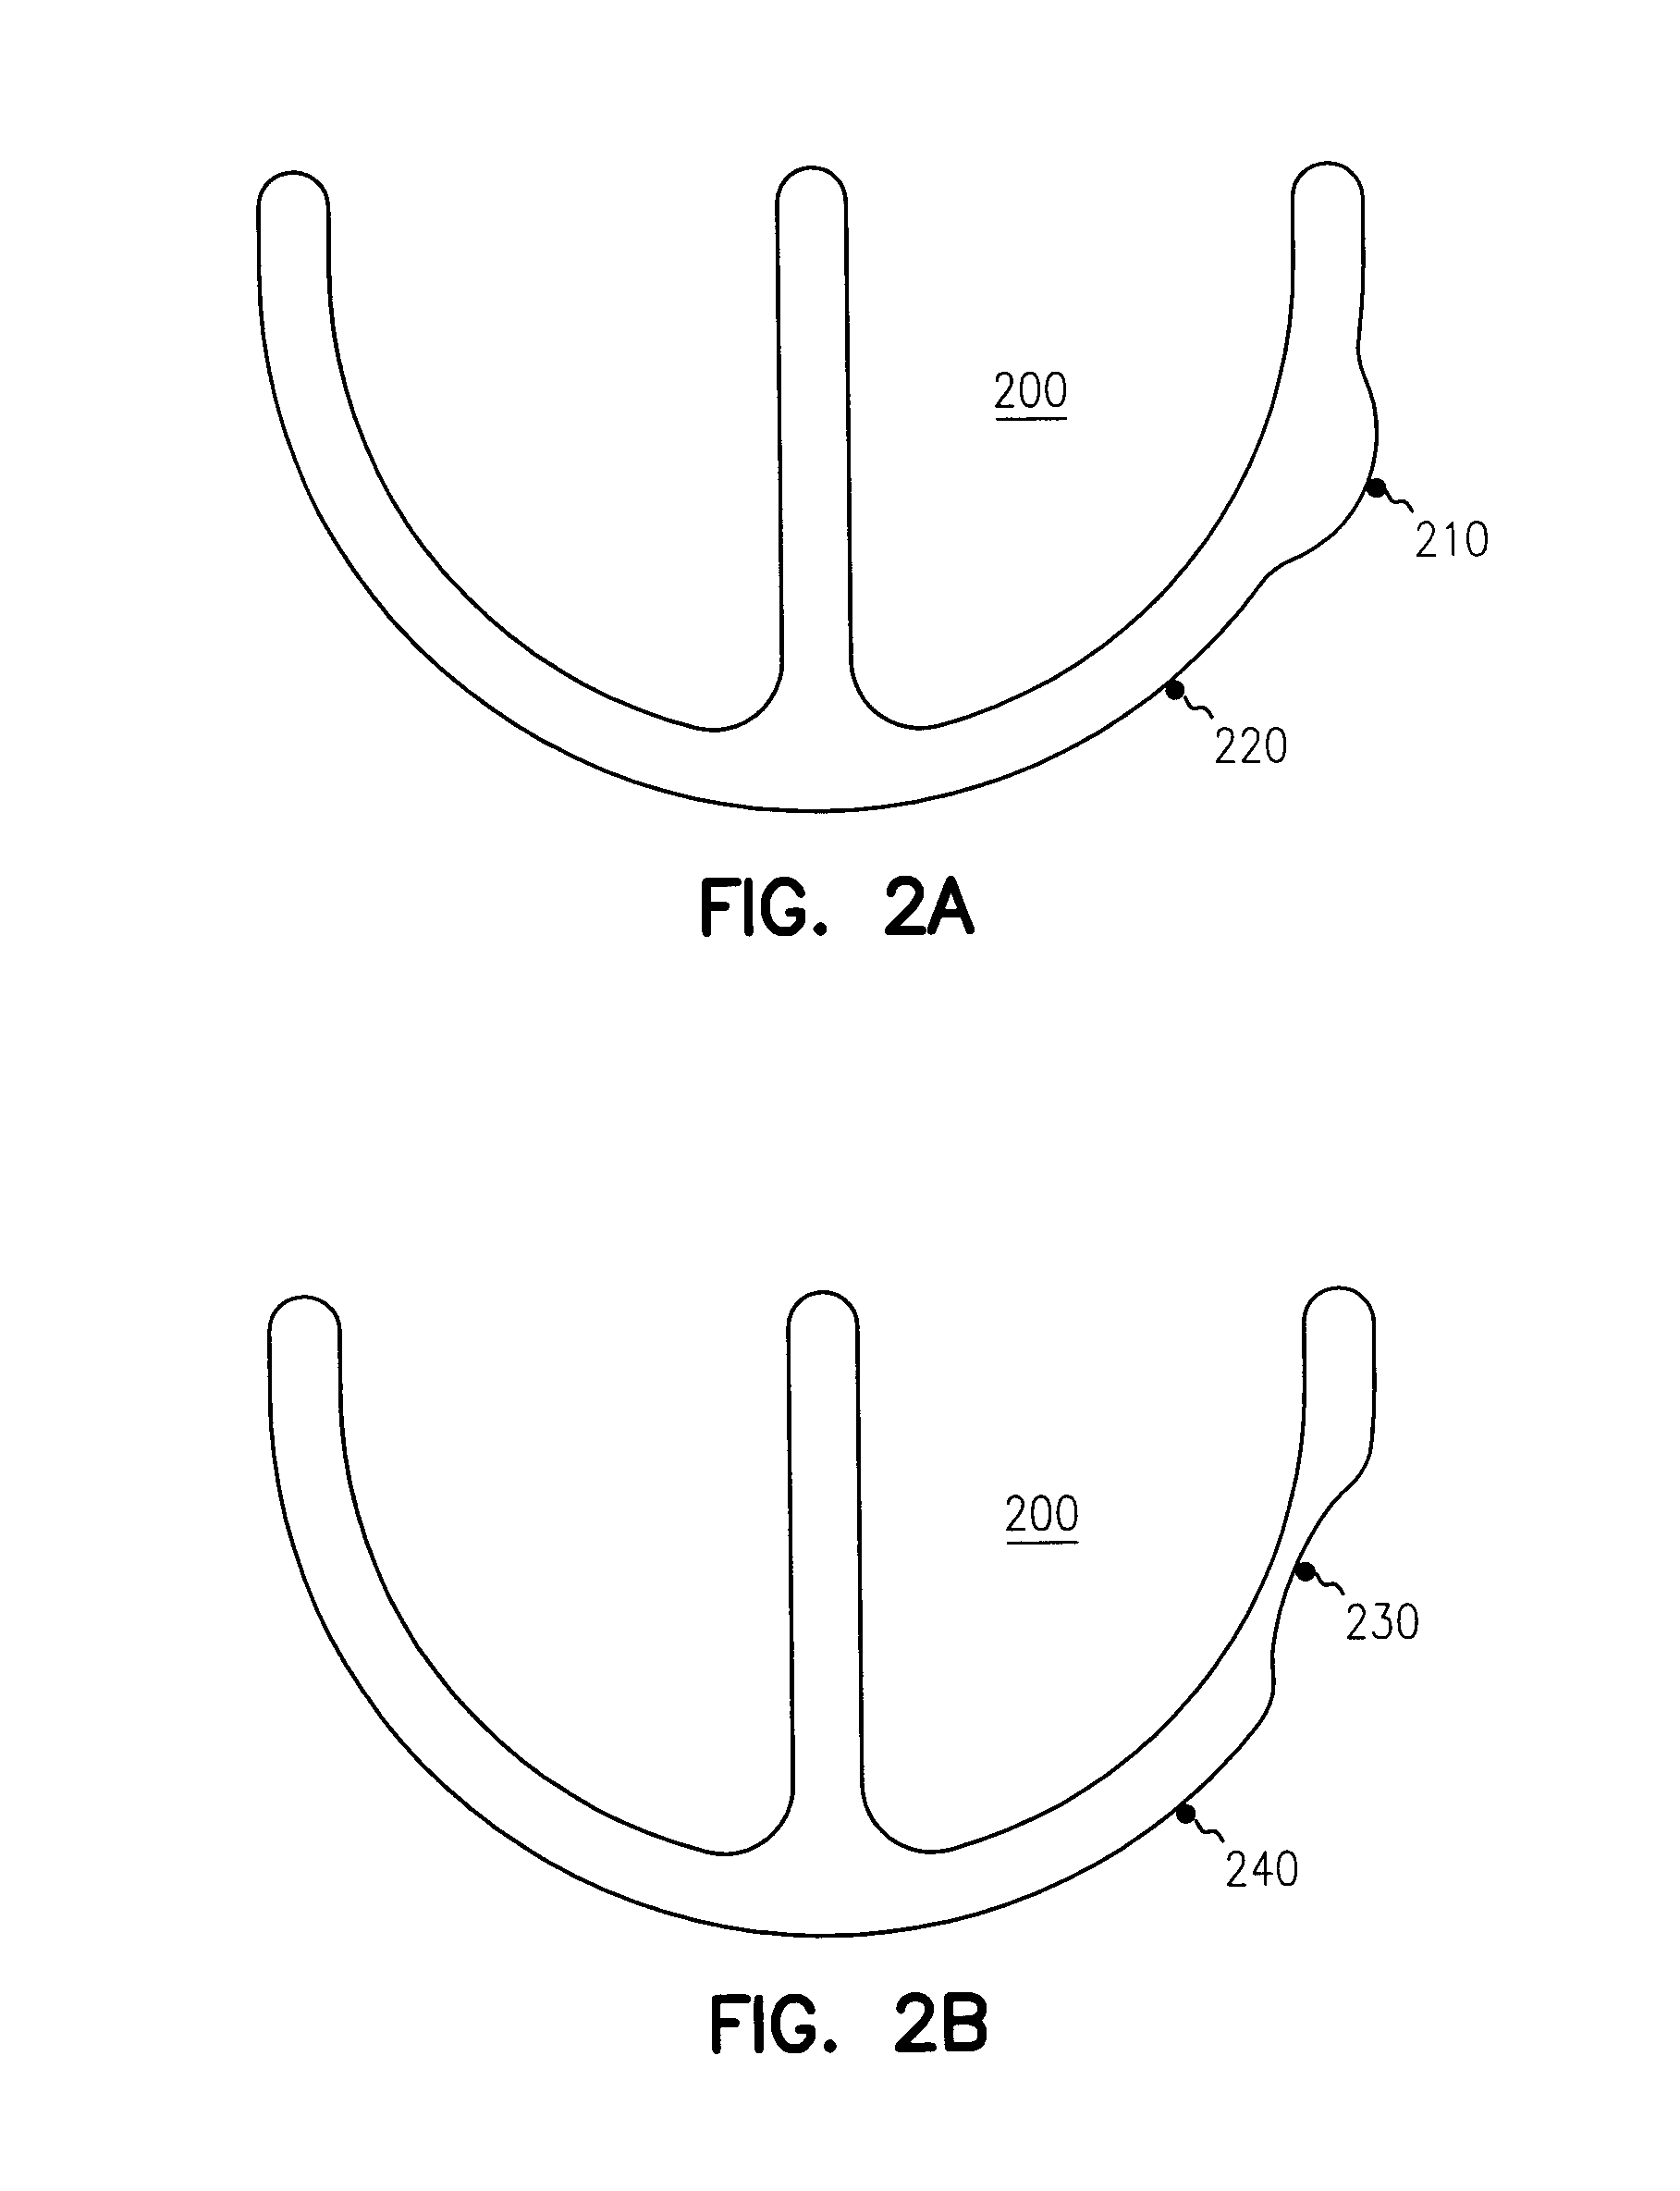 Apparatus and method for reversal of myocardial remodeling with electrical stimulation